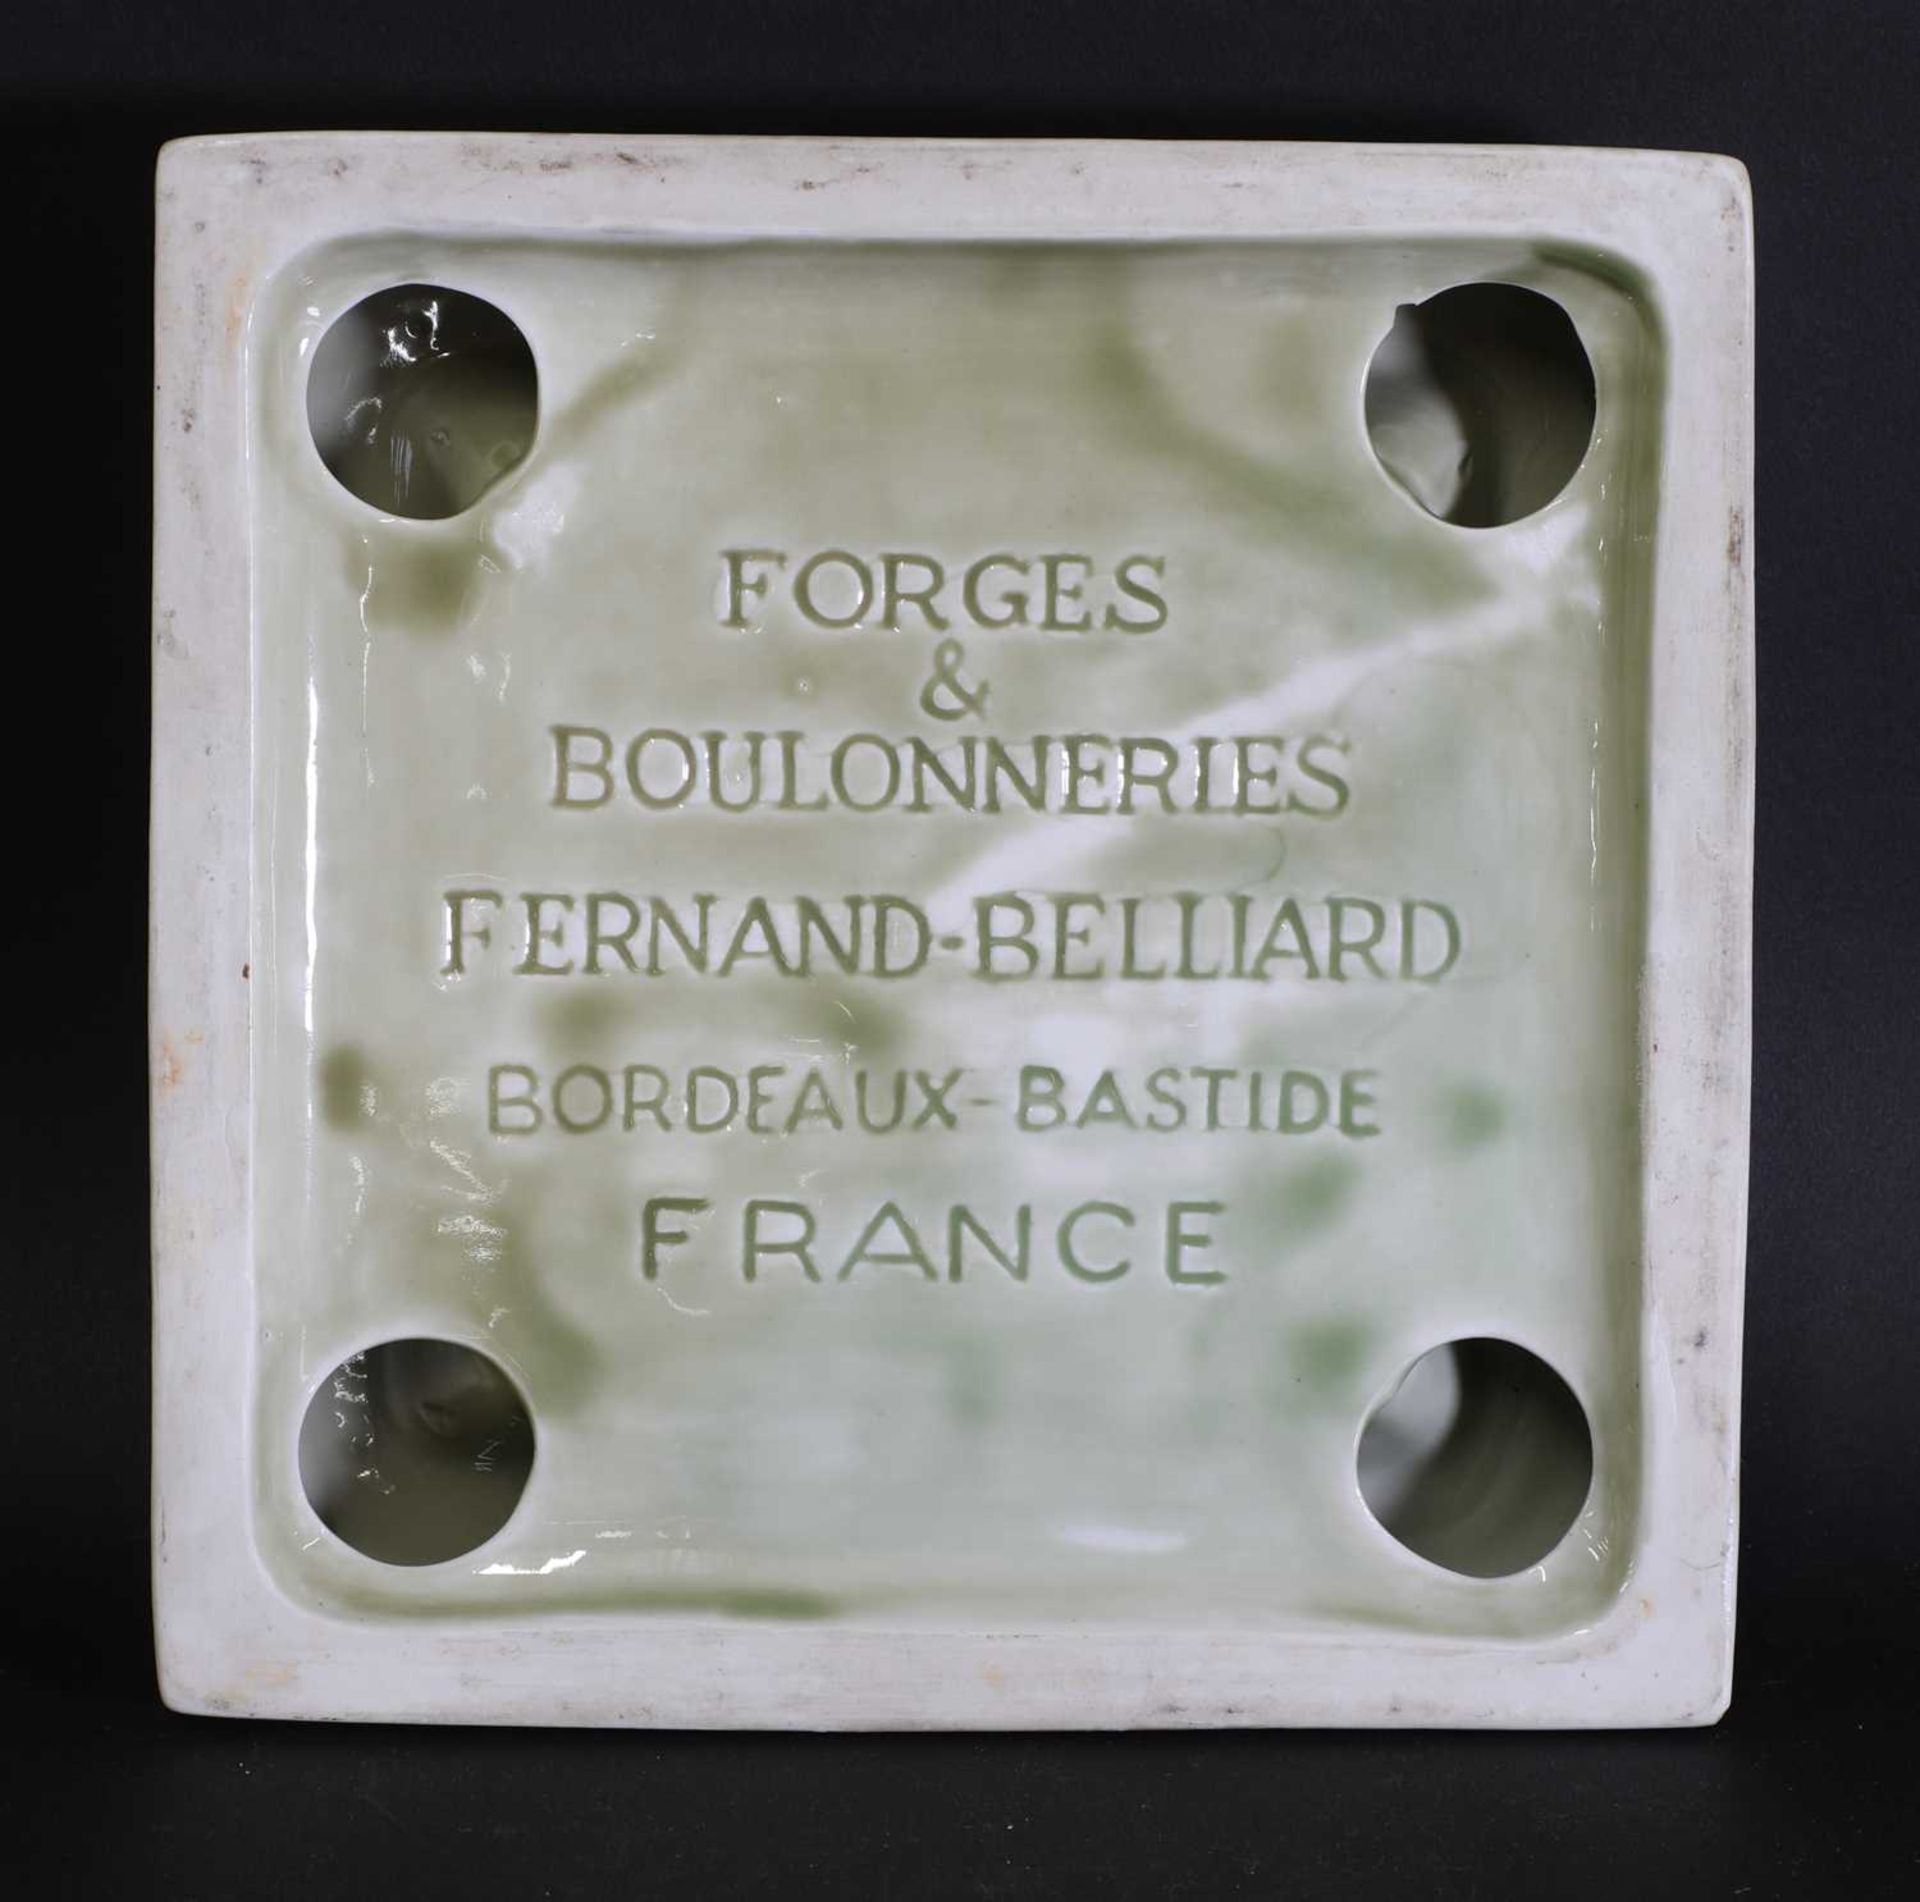 A Forges & Boulonneries Fernand-Belliard pottery ashtray, - Image 3 of 3